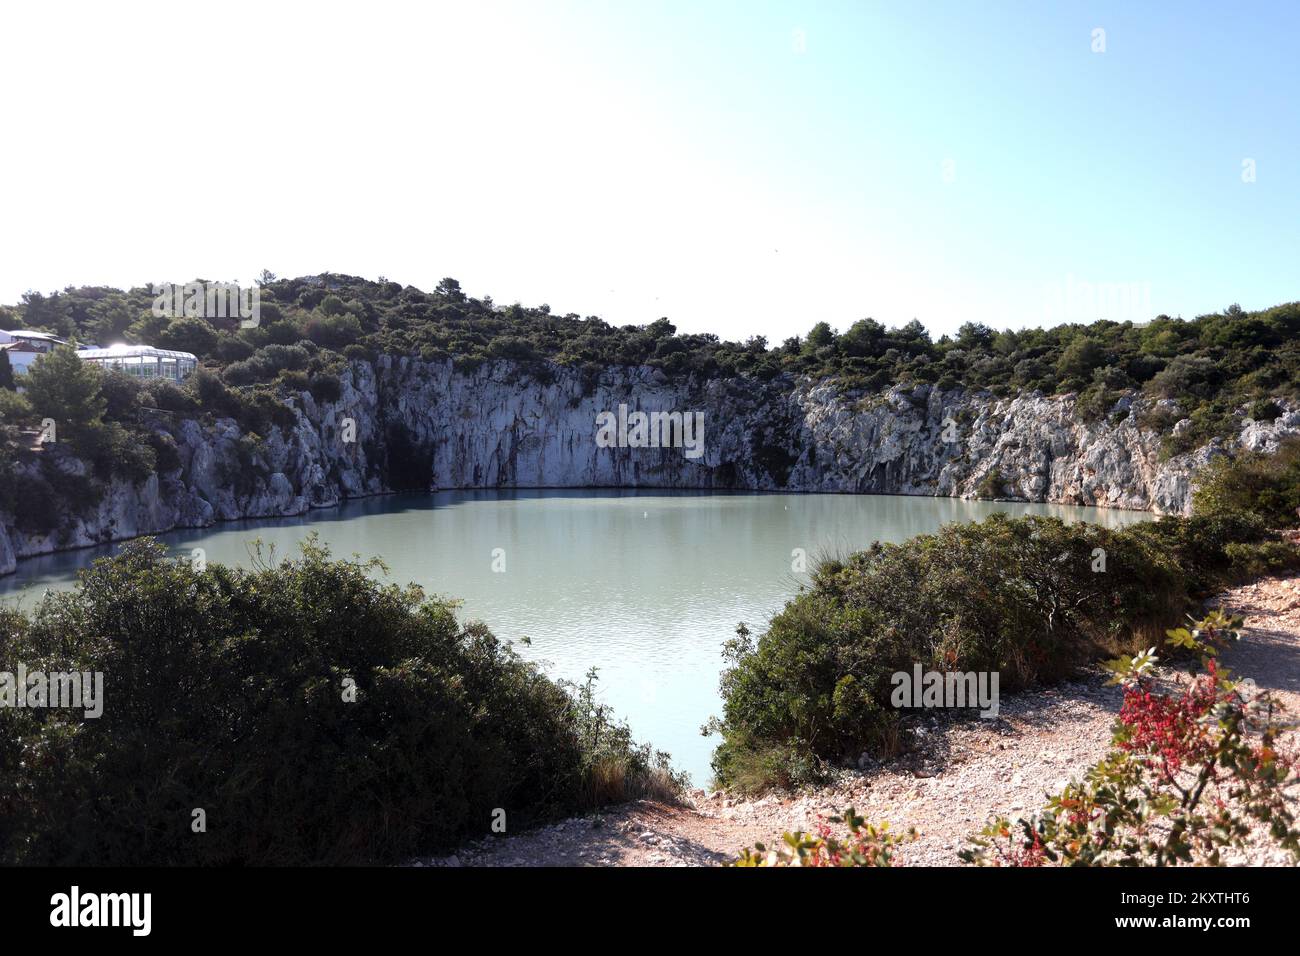 The picture shows sea lake Zmajevo oko (Dragon's eye) near Rogoznica, which has been declared the greatest mystery of the eastern Adriatic coast, has become muddy again and a stench reminiscent of rotten eggs is spreading around it. This cataclysm caused the death of living organisms., in Sibenik, Croatia, on October 15, 2021. Photo: Dusko Jaramaz/PIXSELL Stock Photo